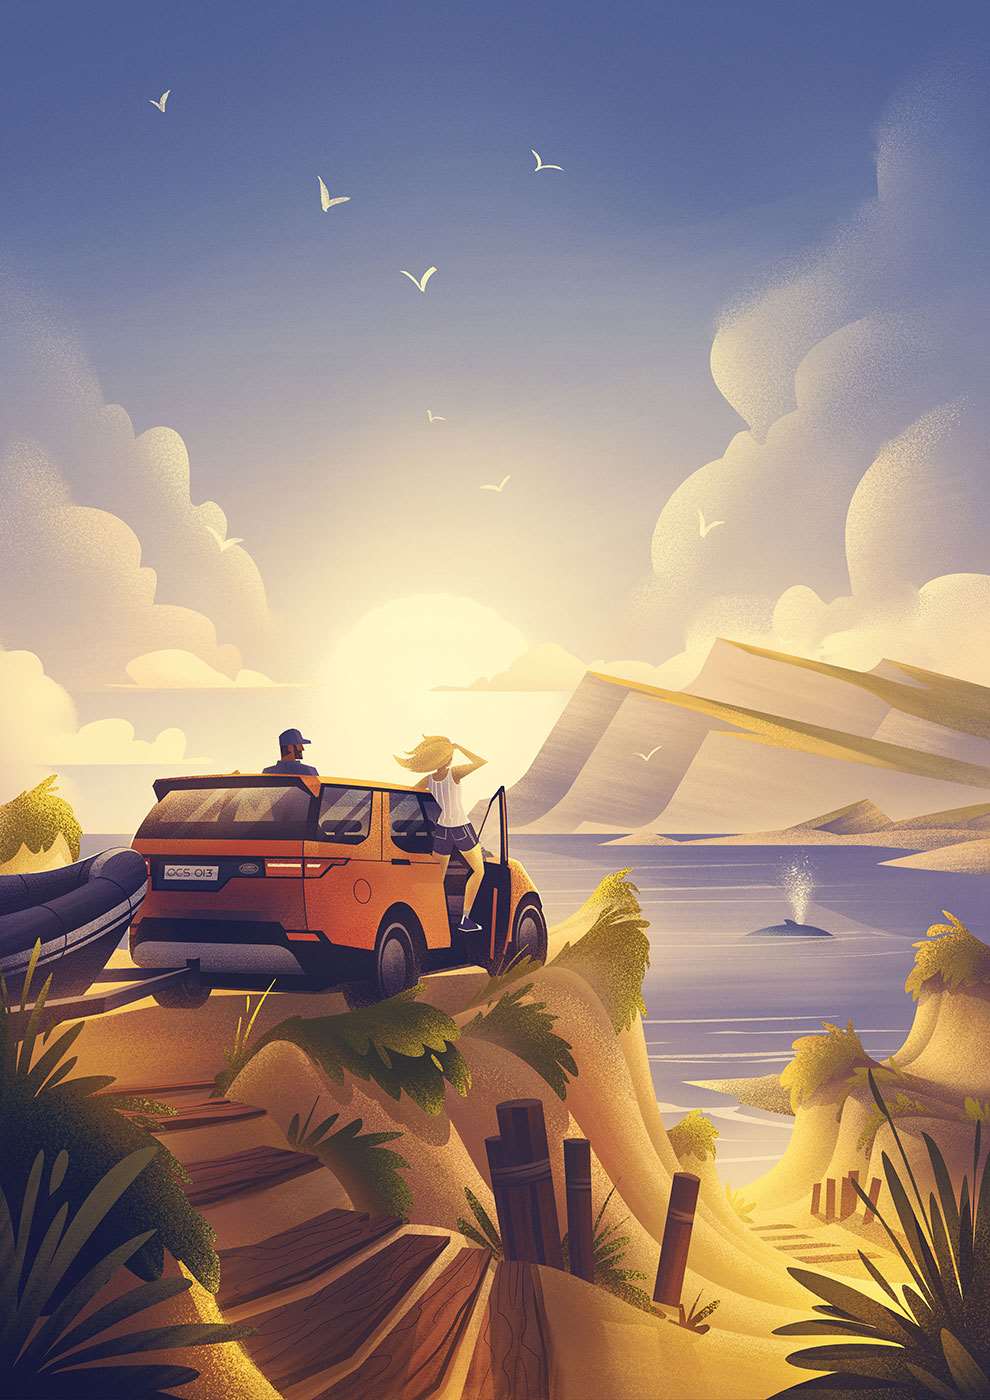 Brian Edward Miller, Family adventure illustration for automotive company Land Rover featuring a family arriving at location and spotting a whale in the sea.